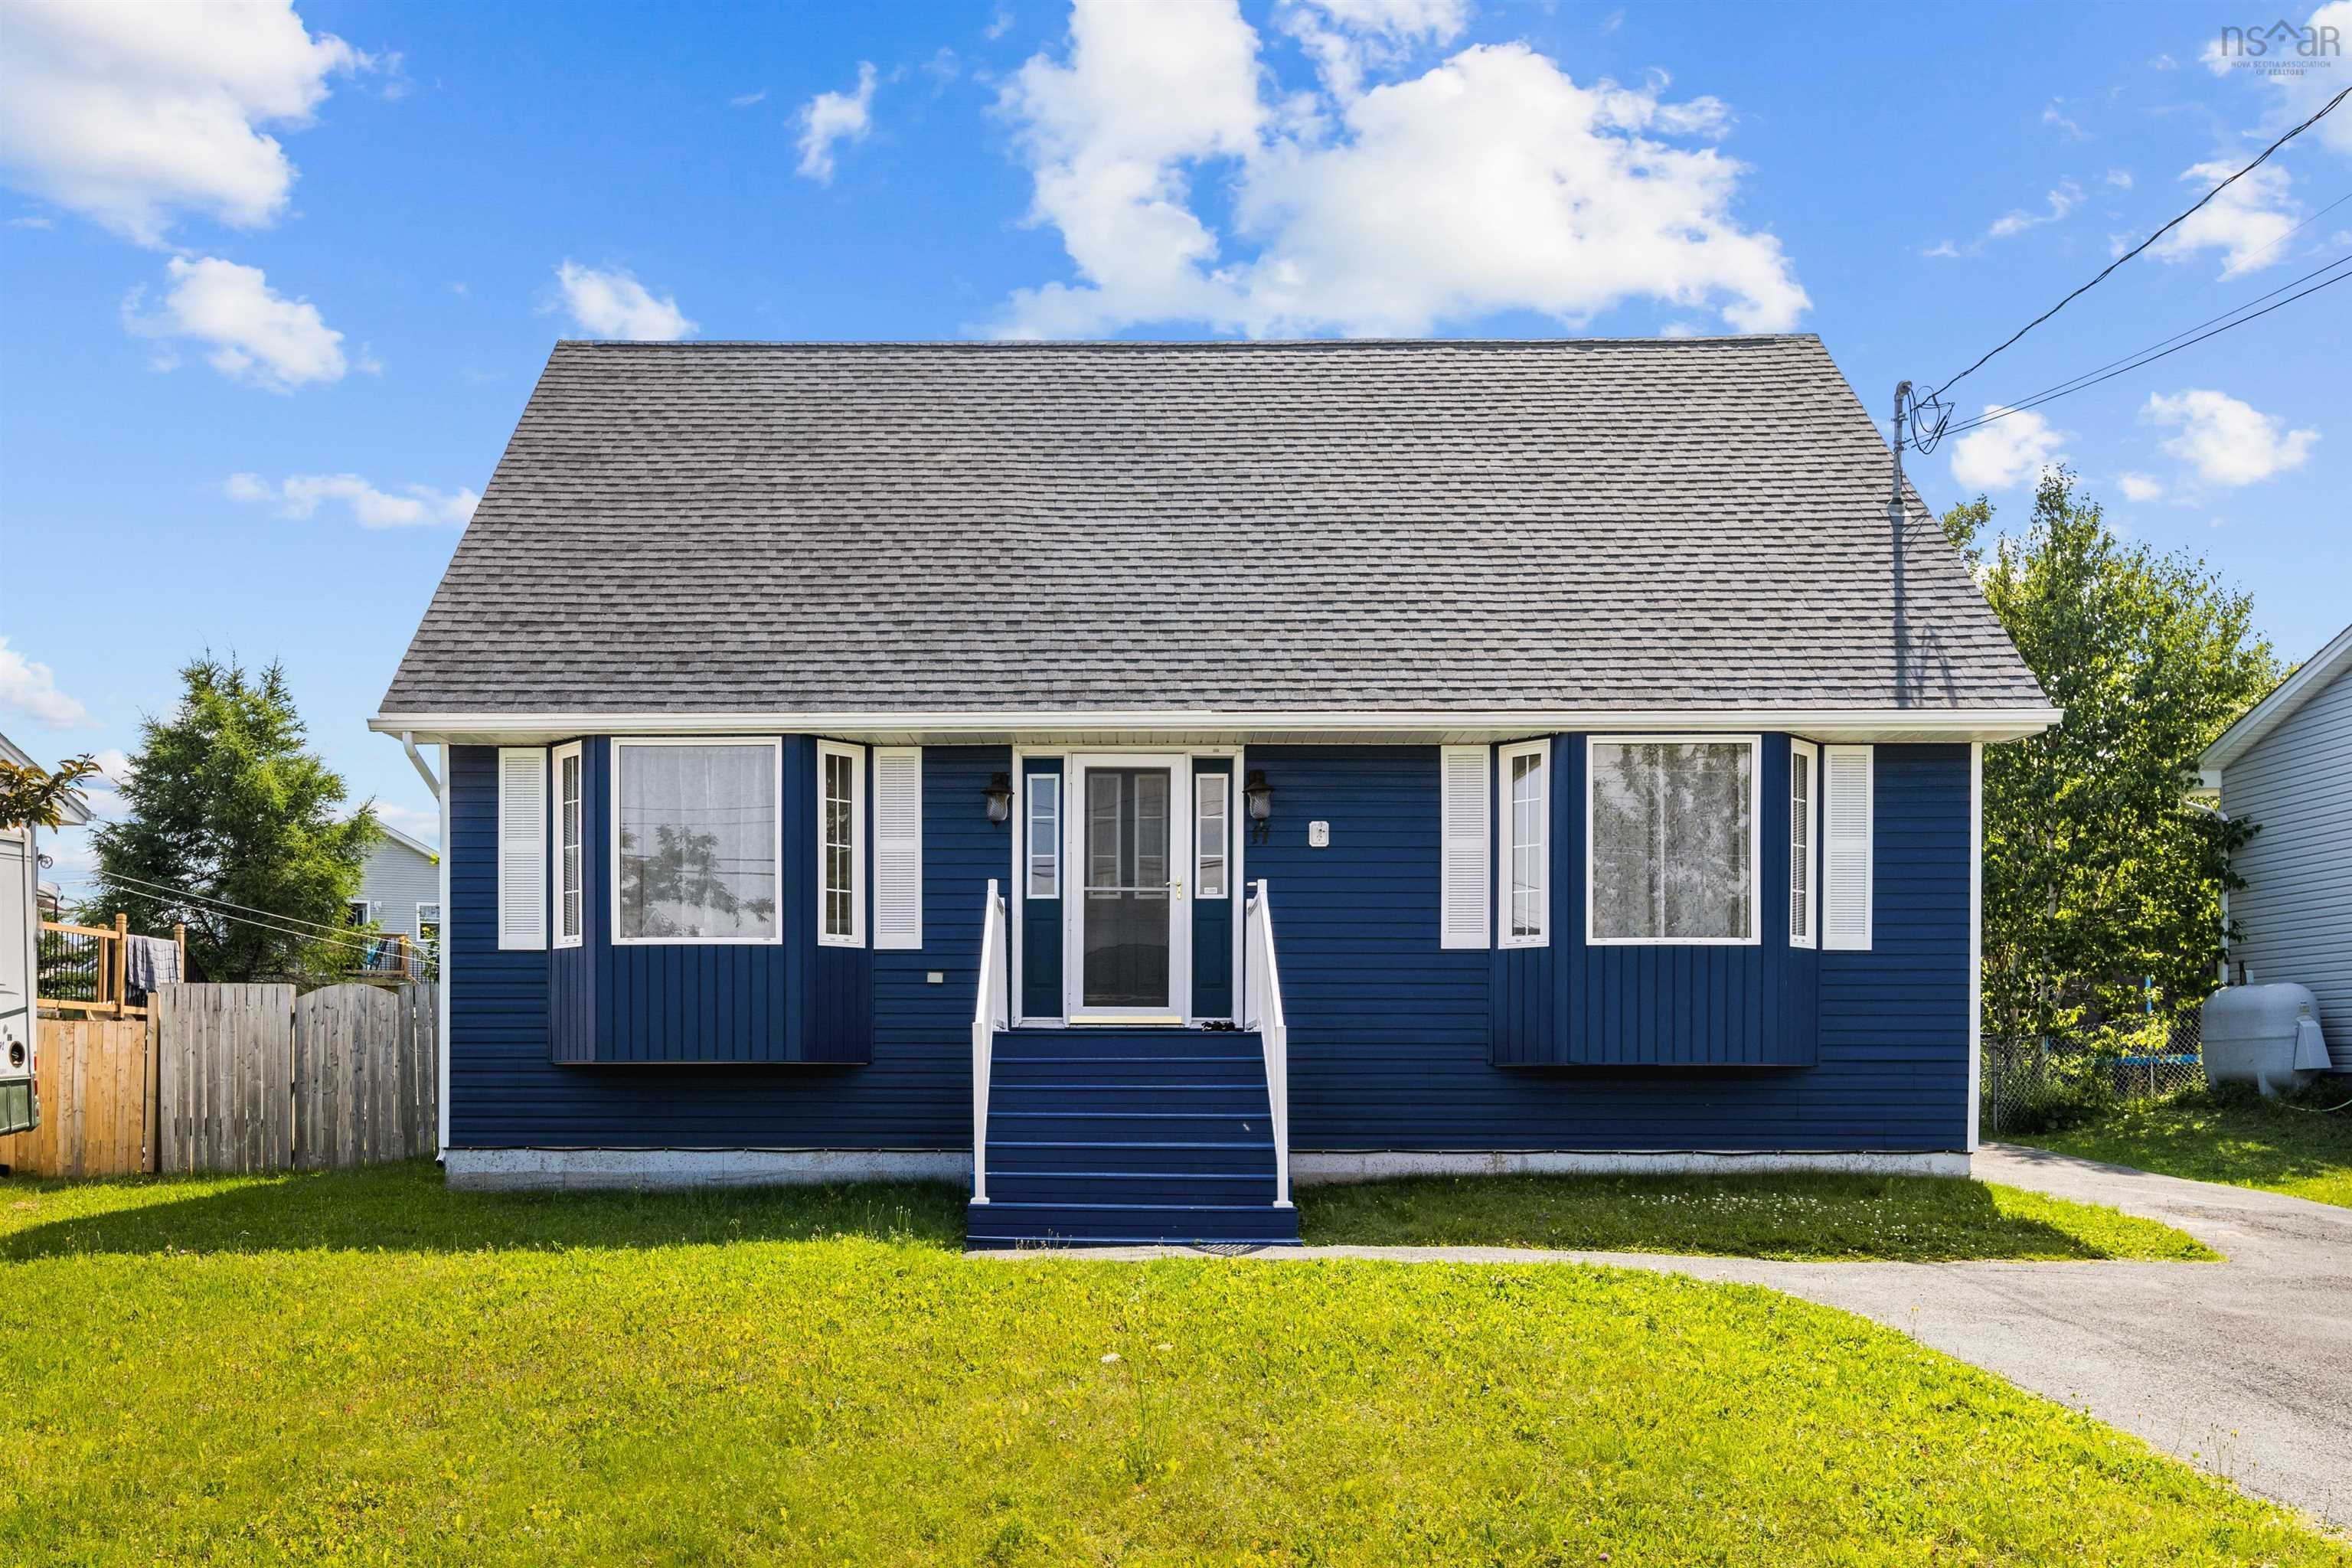 Main Photo: 17 Samuel Danial Drive in Eastern Passage: 11-Dartmouth Woodside, Eastern P Residential for sale (Halifax-Dartmouth)  : MLS®# 202217560